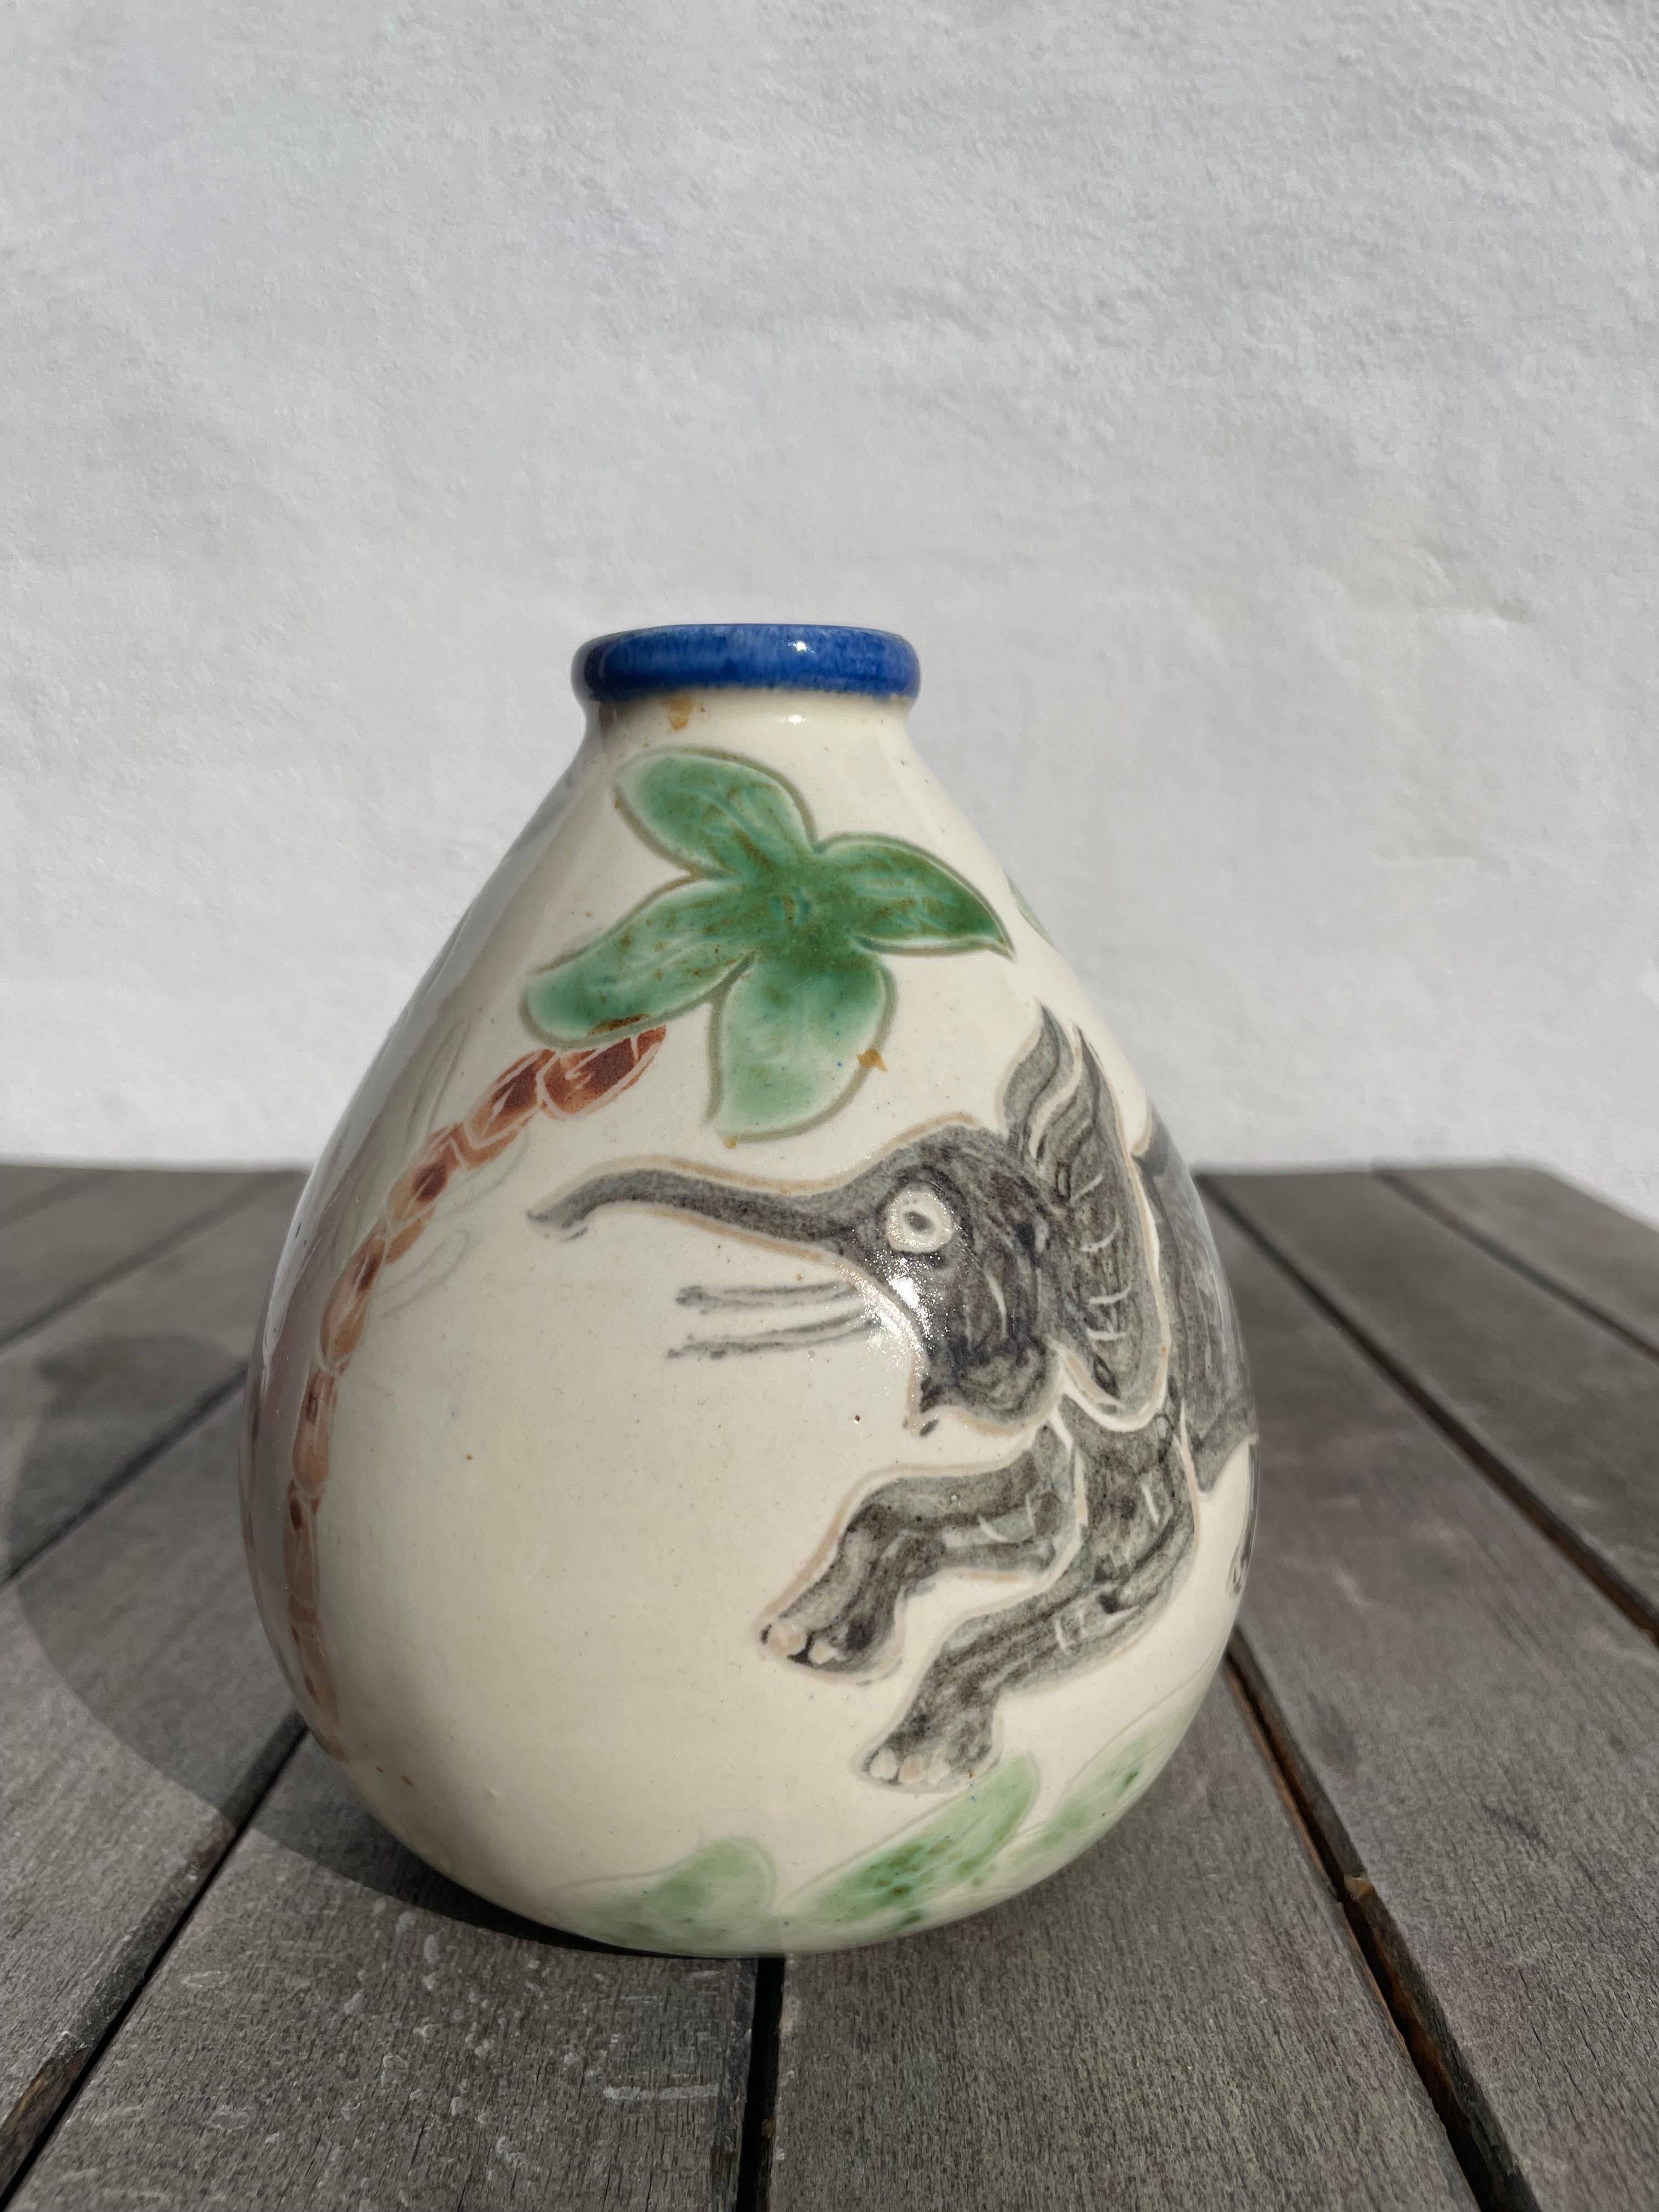 20th Century Grimstrup Hand-Decorated Vase with Elephants, Palmtrees, Leaves, 1950s For Sale